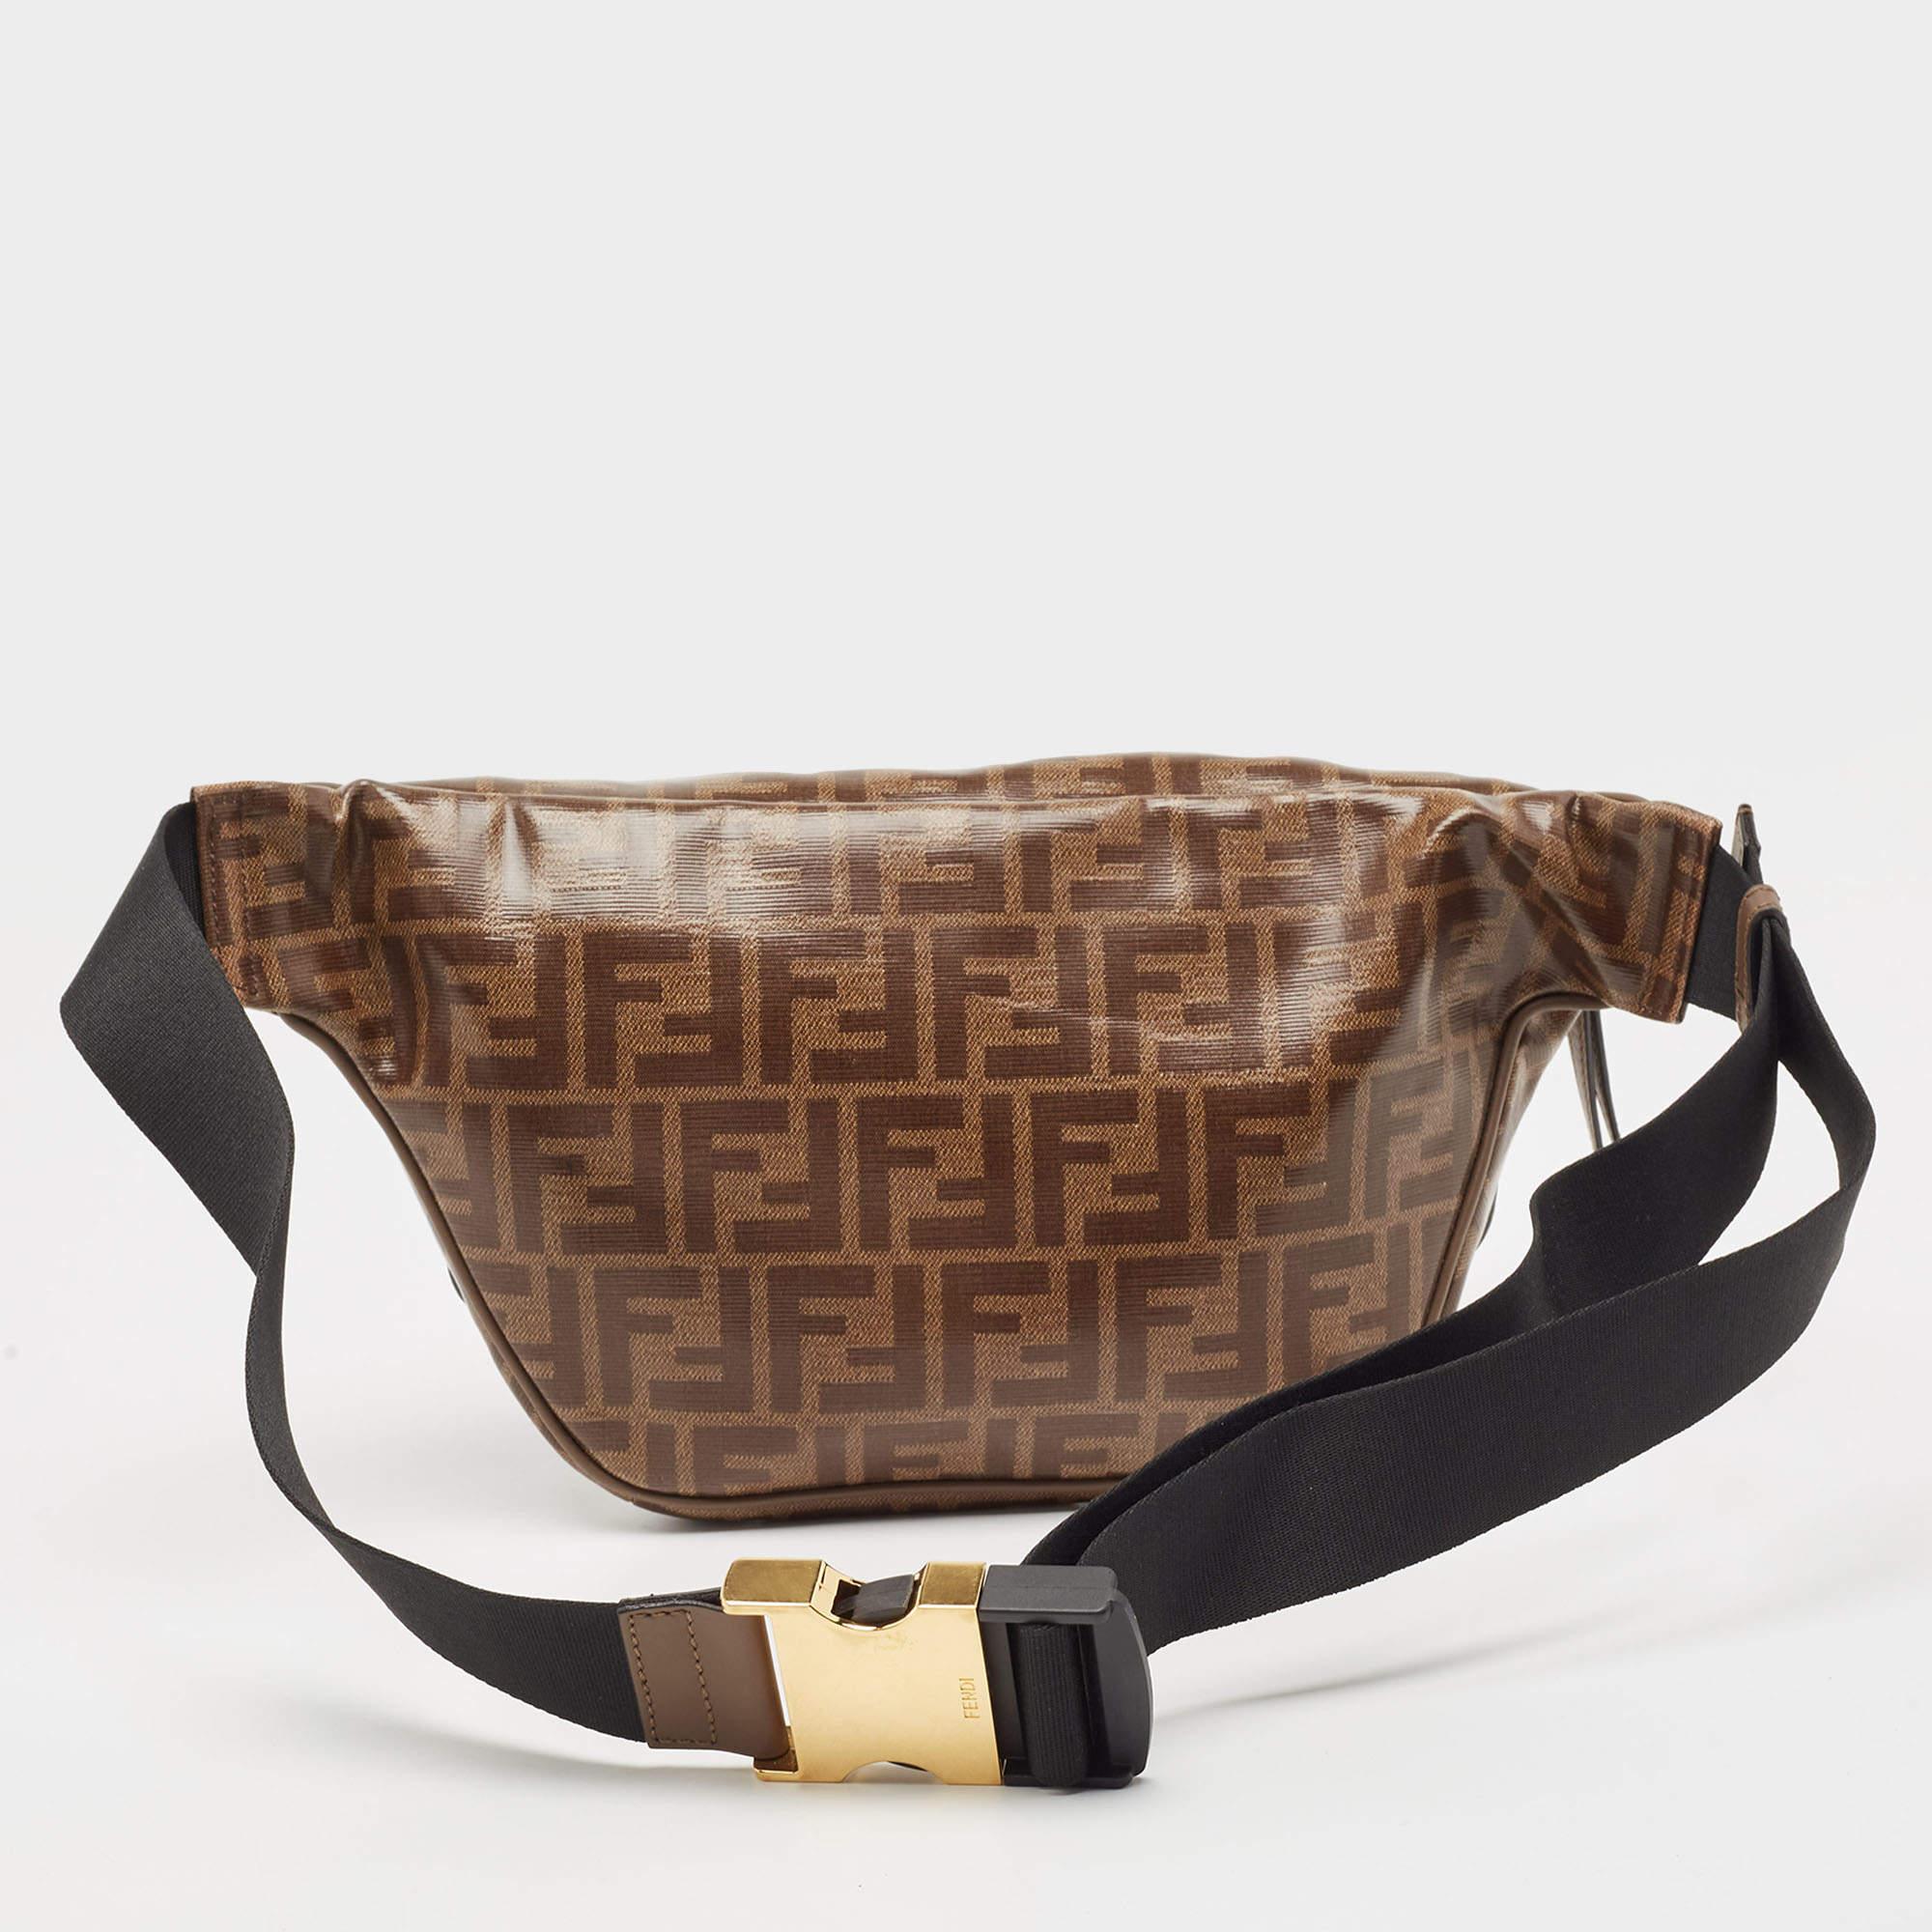 This uber-stylish Fendi x Fila waist belt bag aims to be an elevating piece. It is carefully created using Zucca coated canvas & leather and has the details of both brands. See how it transforms a T-shirt dress or a solid jumpsuit!

Includes: Info